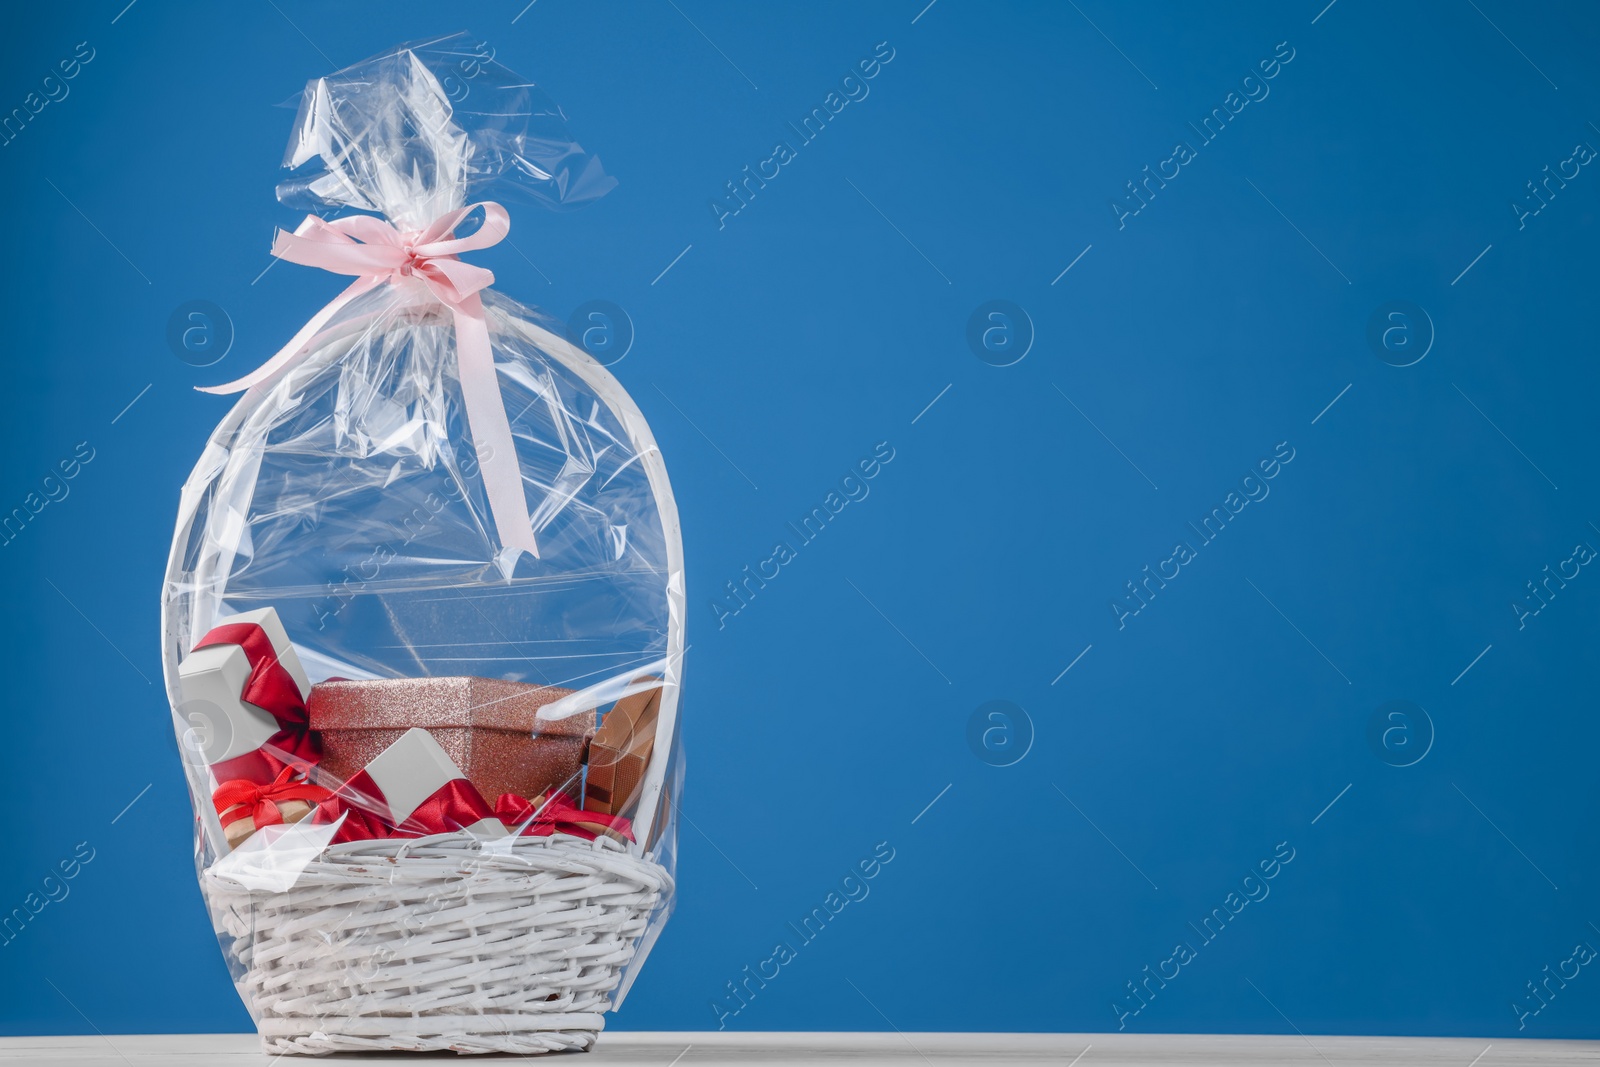 Photo of Wicker basket full of gift boxes on white wooden table against blue background. Space for text